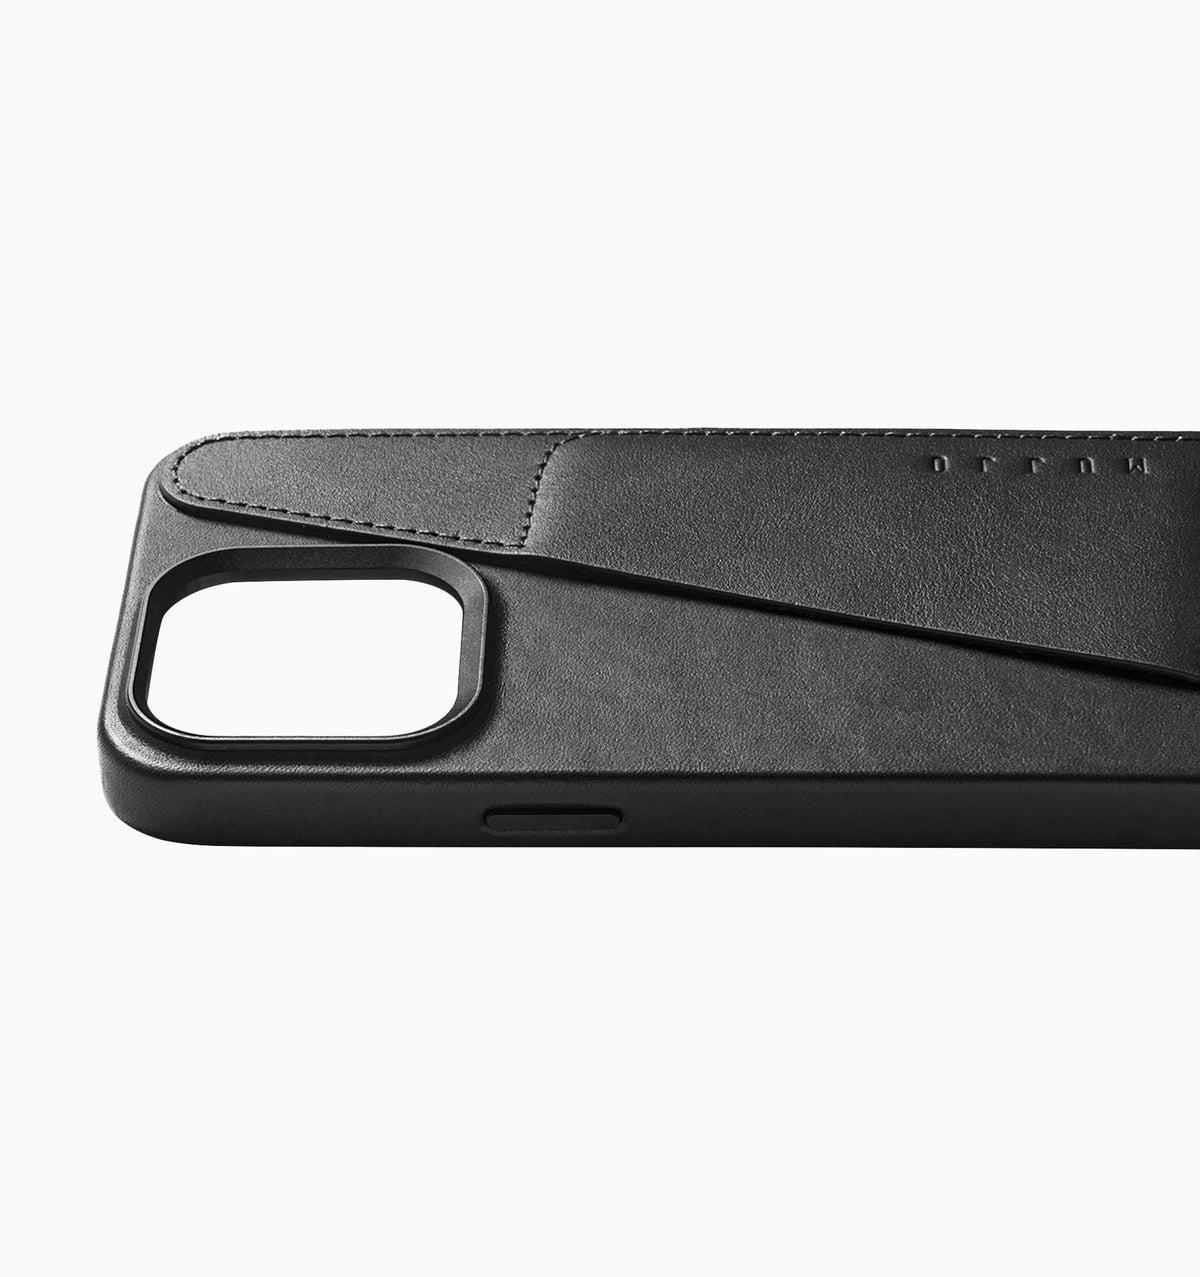 Mujjo Full Leather Wallet Case - iPhone 15 Pro Max - Black